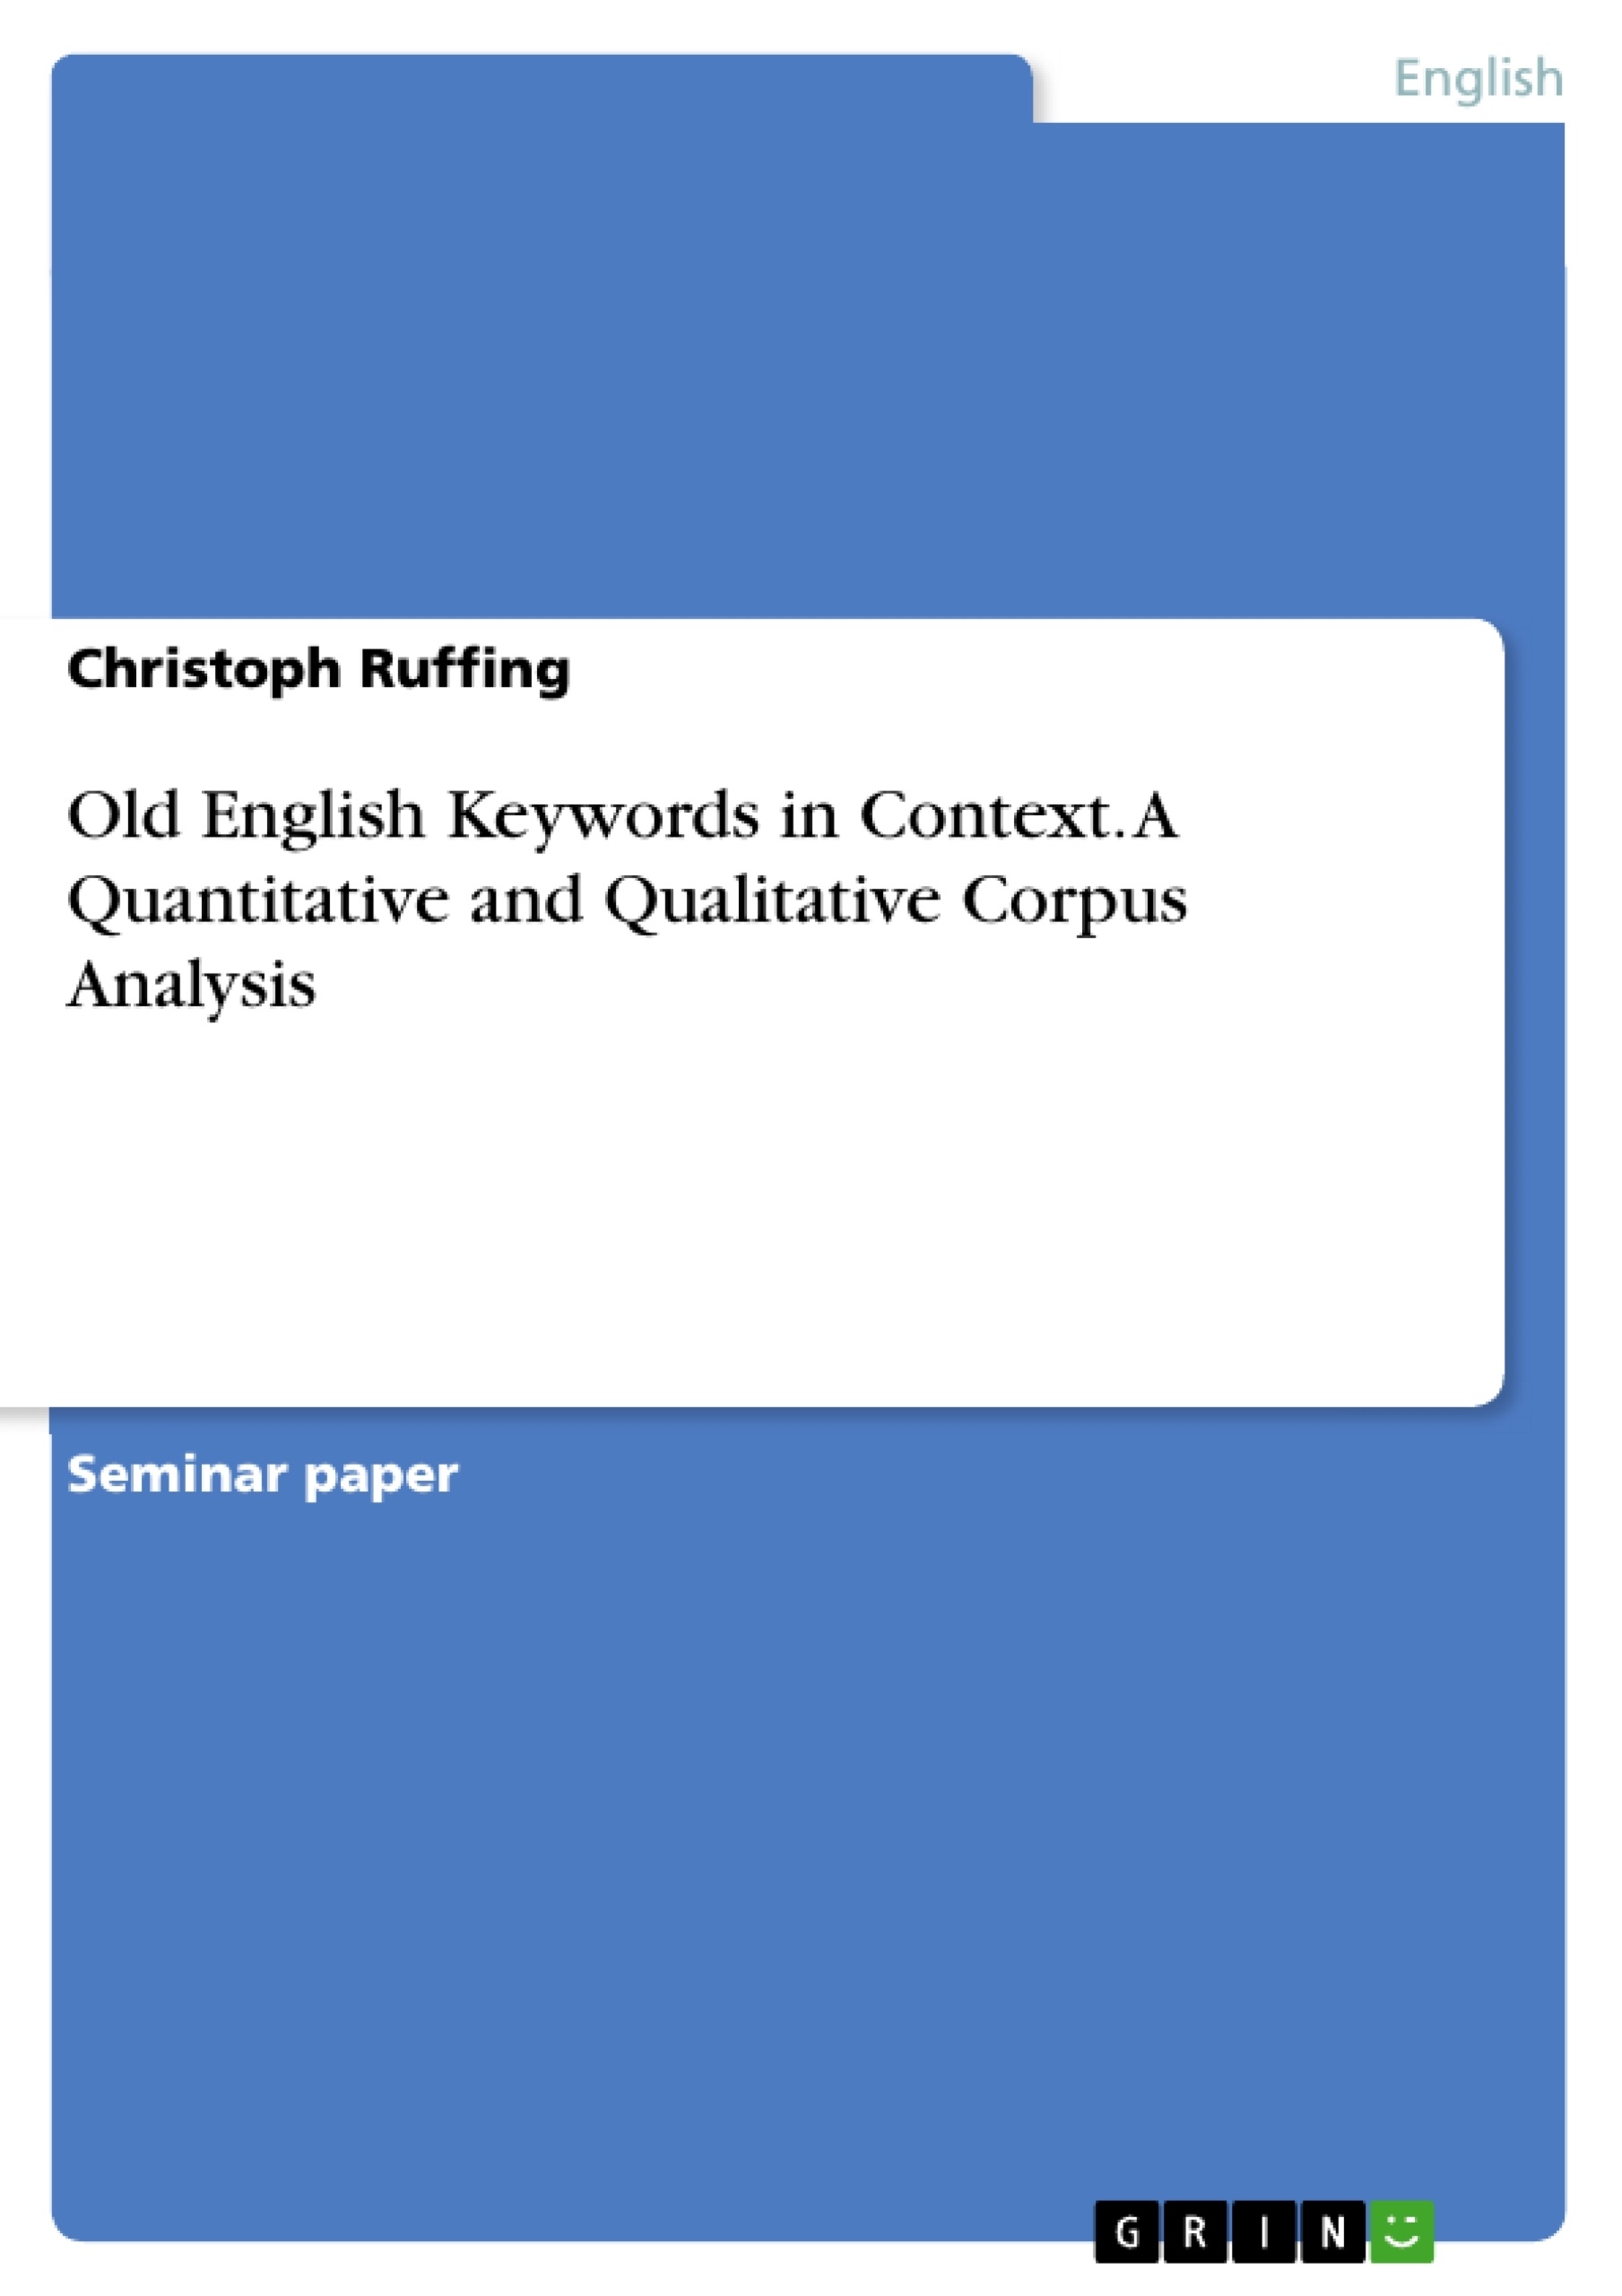 Title: Old English Keywords in Context. A Quantitative and Qualitative Corpus Analysis